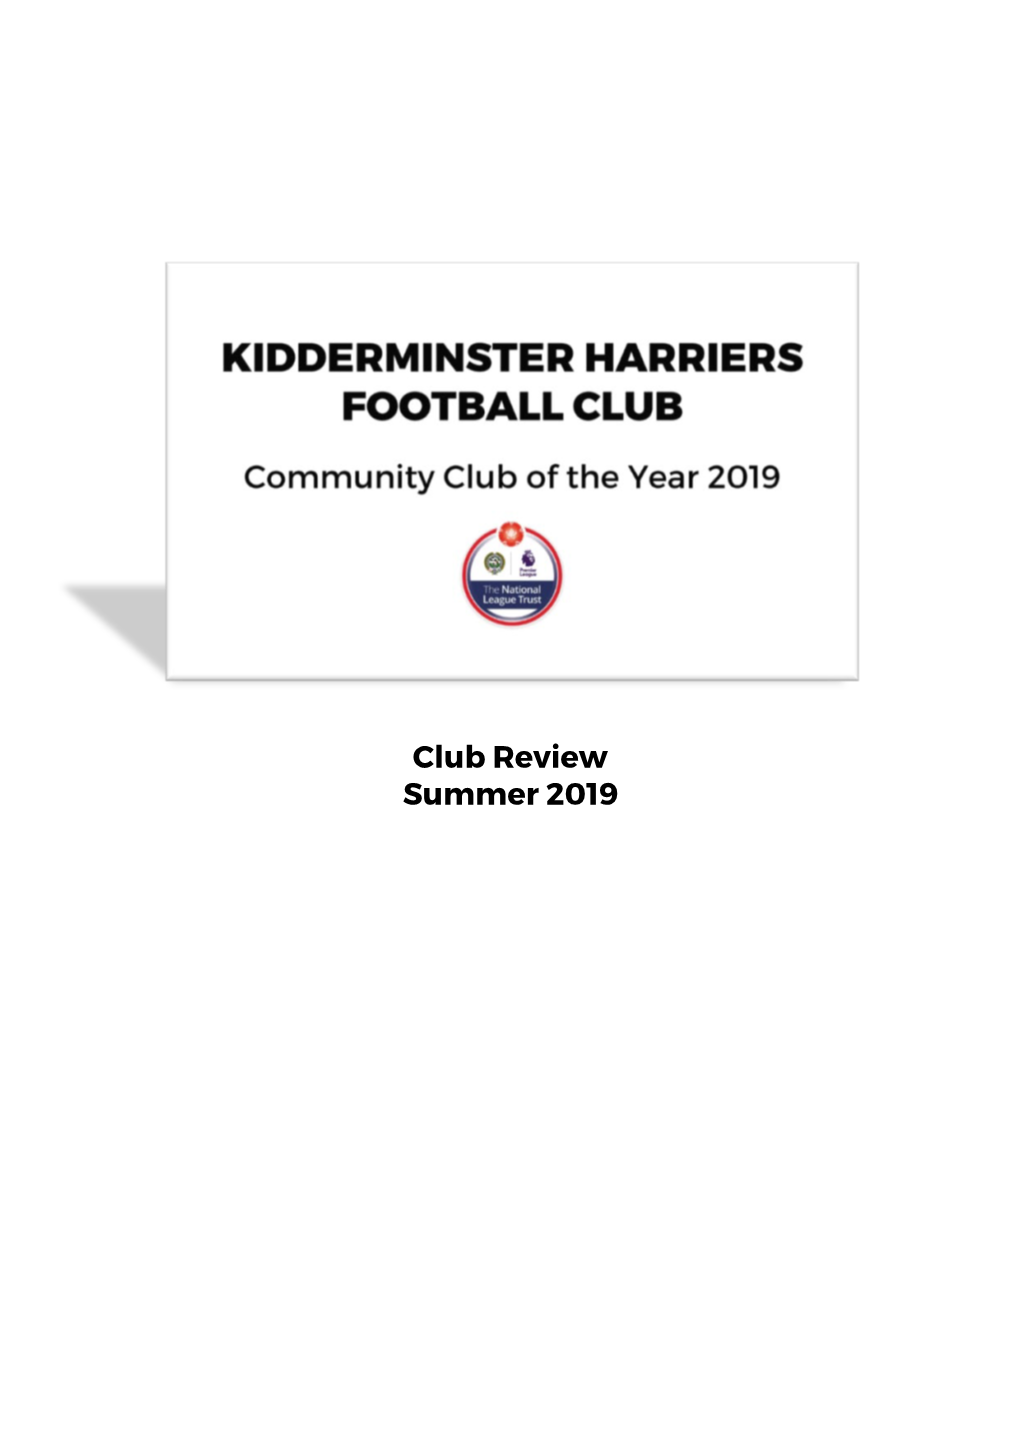 Club Review Summer 2019